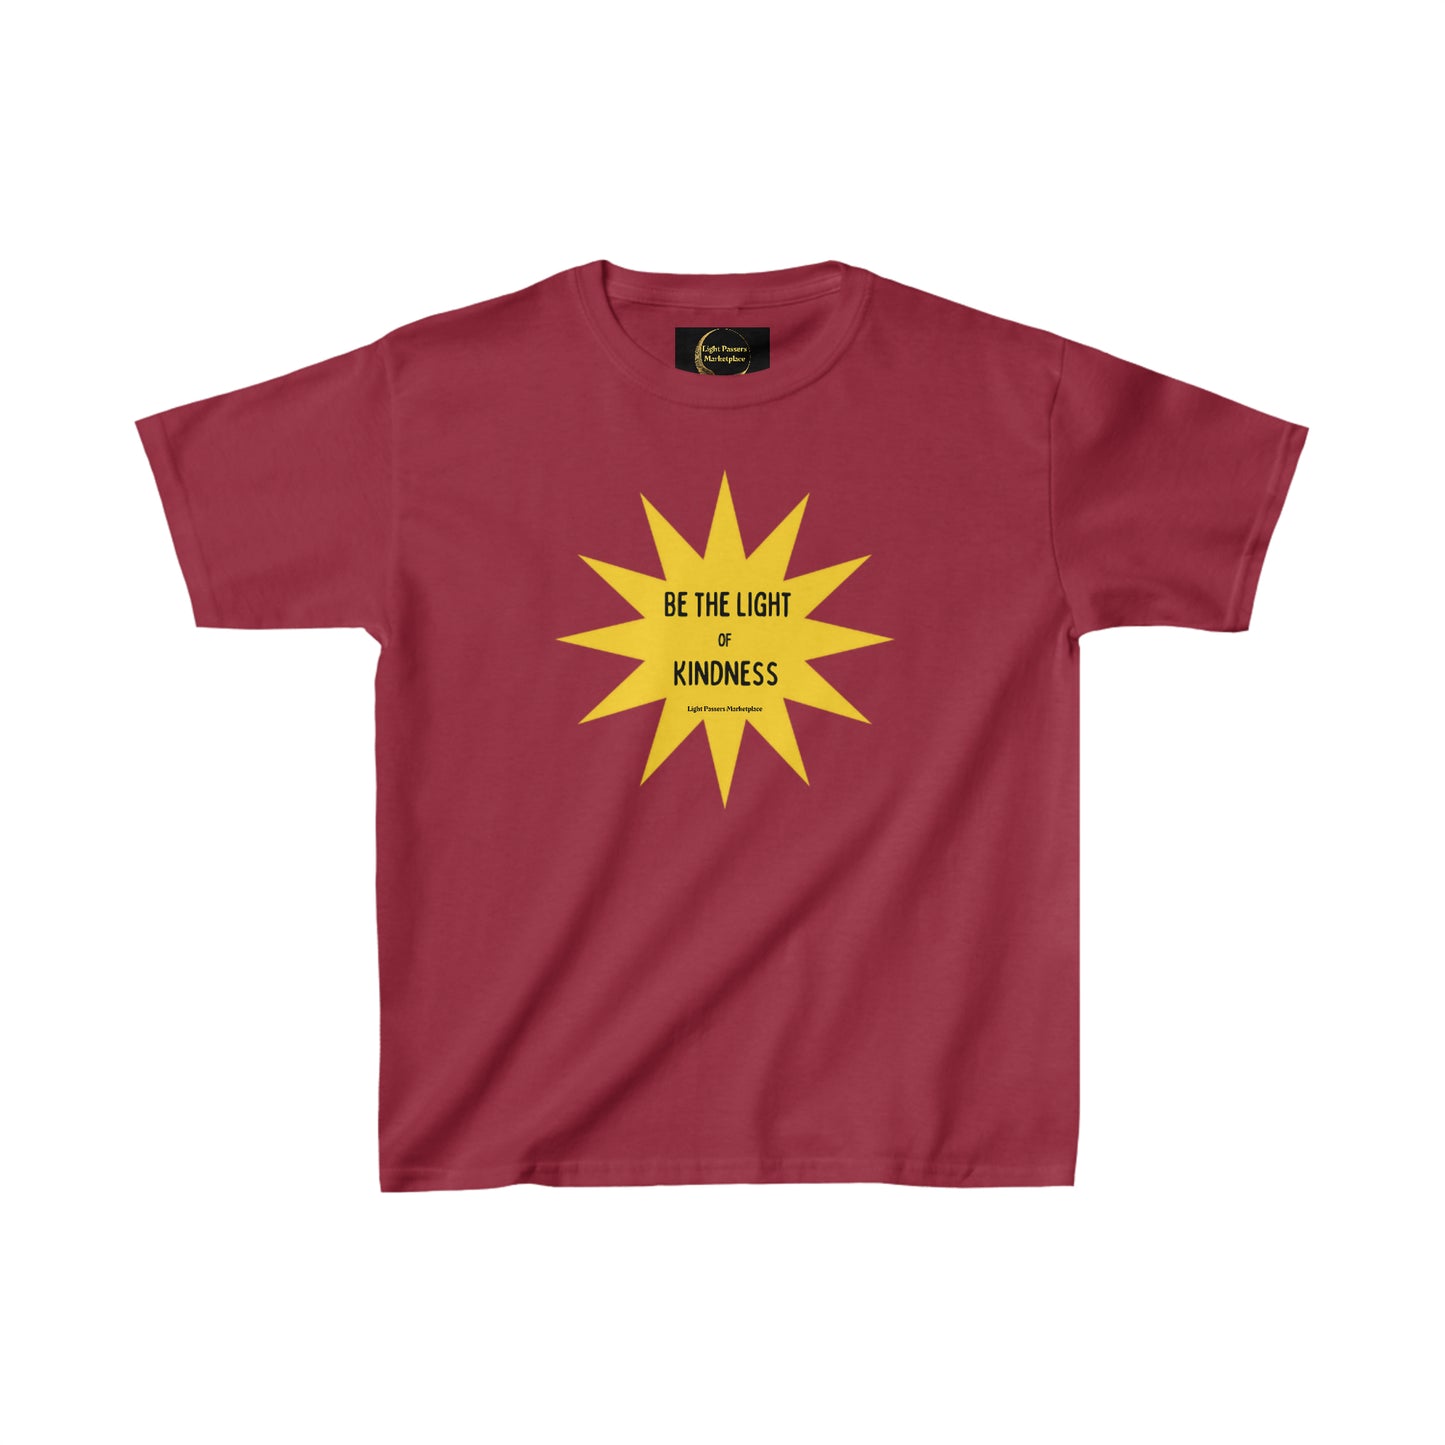 Youth cotton T-shirt featuring a yellow star with black text. 100% cotton, ideal for printing. Twill tape shoulders, ribbed collar for durability. Midweight fabric, tear-away label, classic fit.